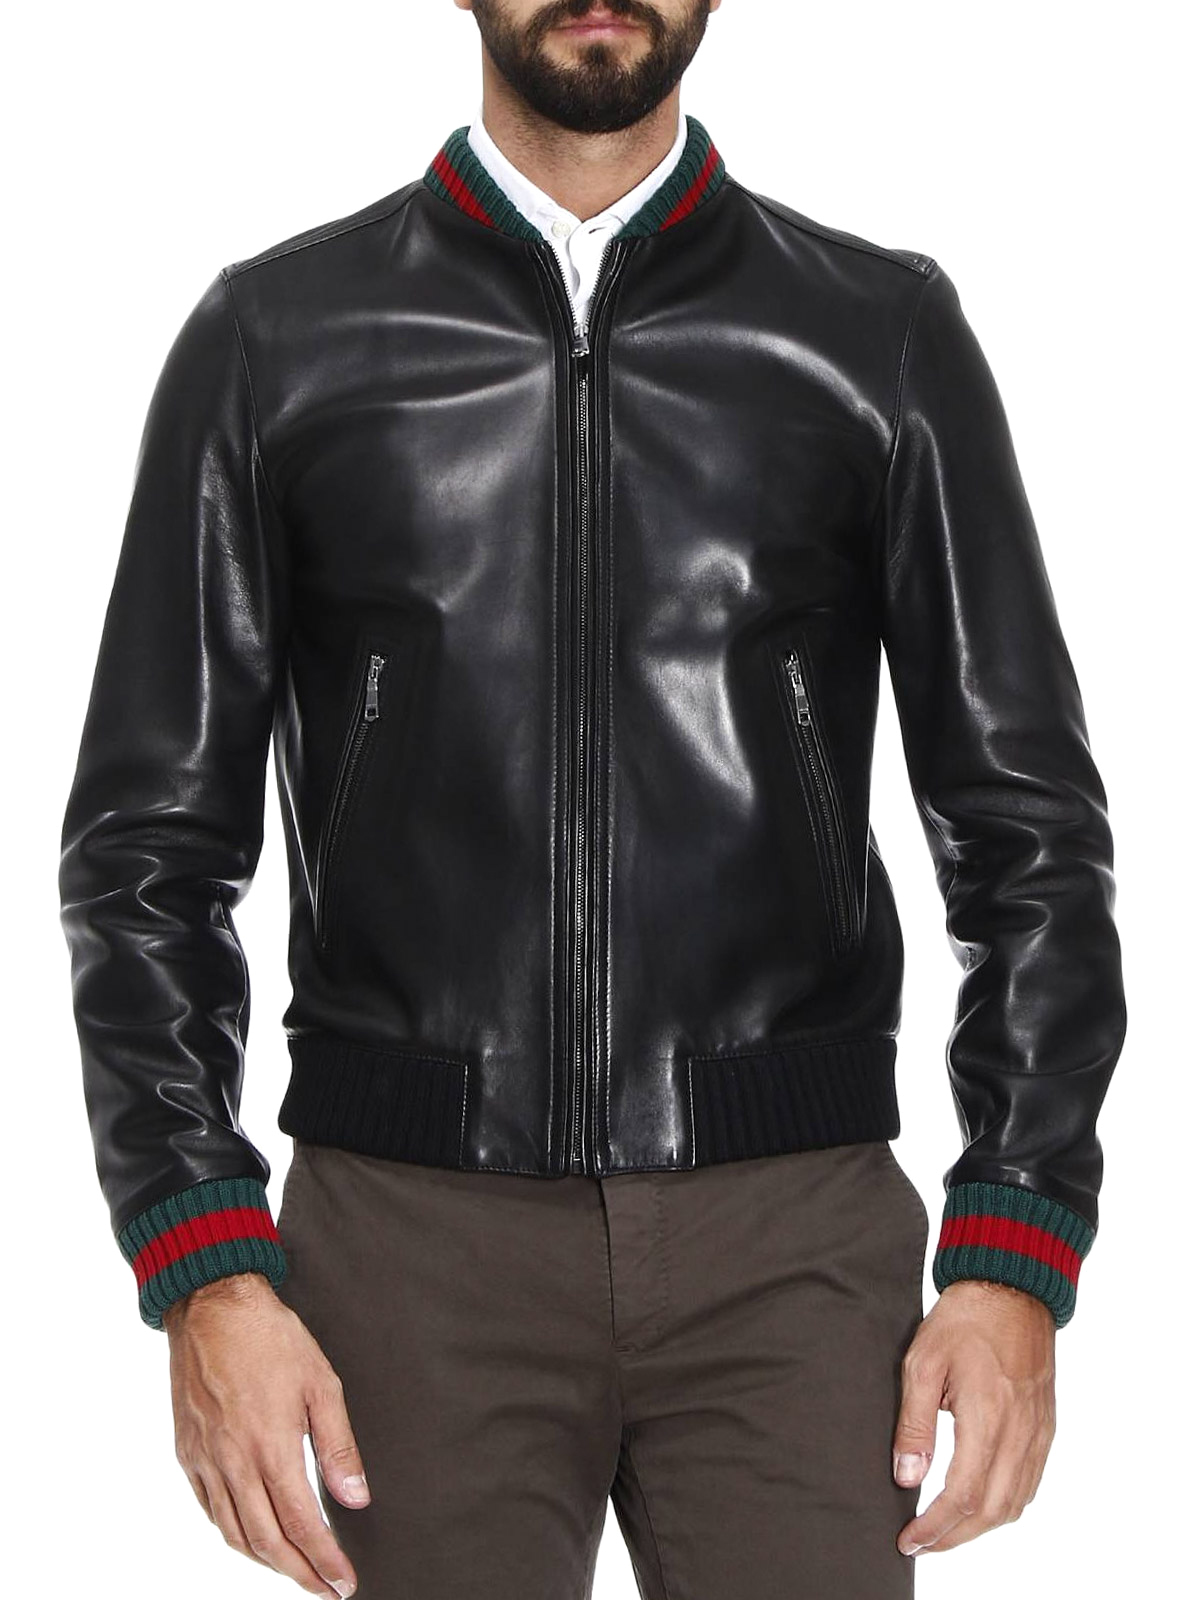 gucci leather bomber jacket